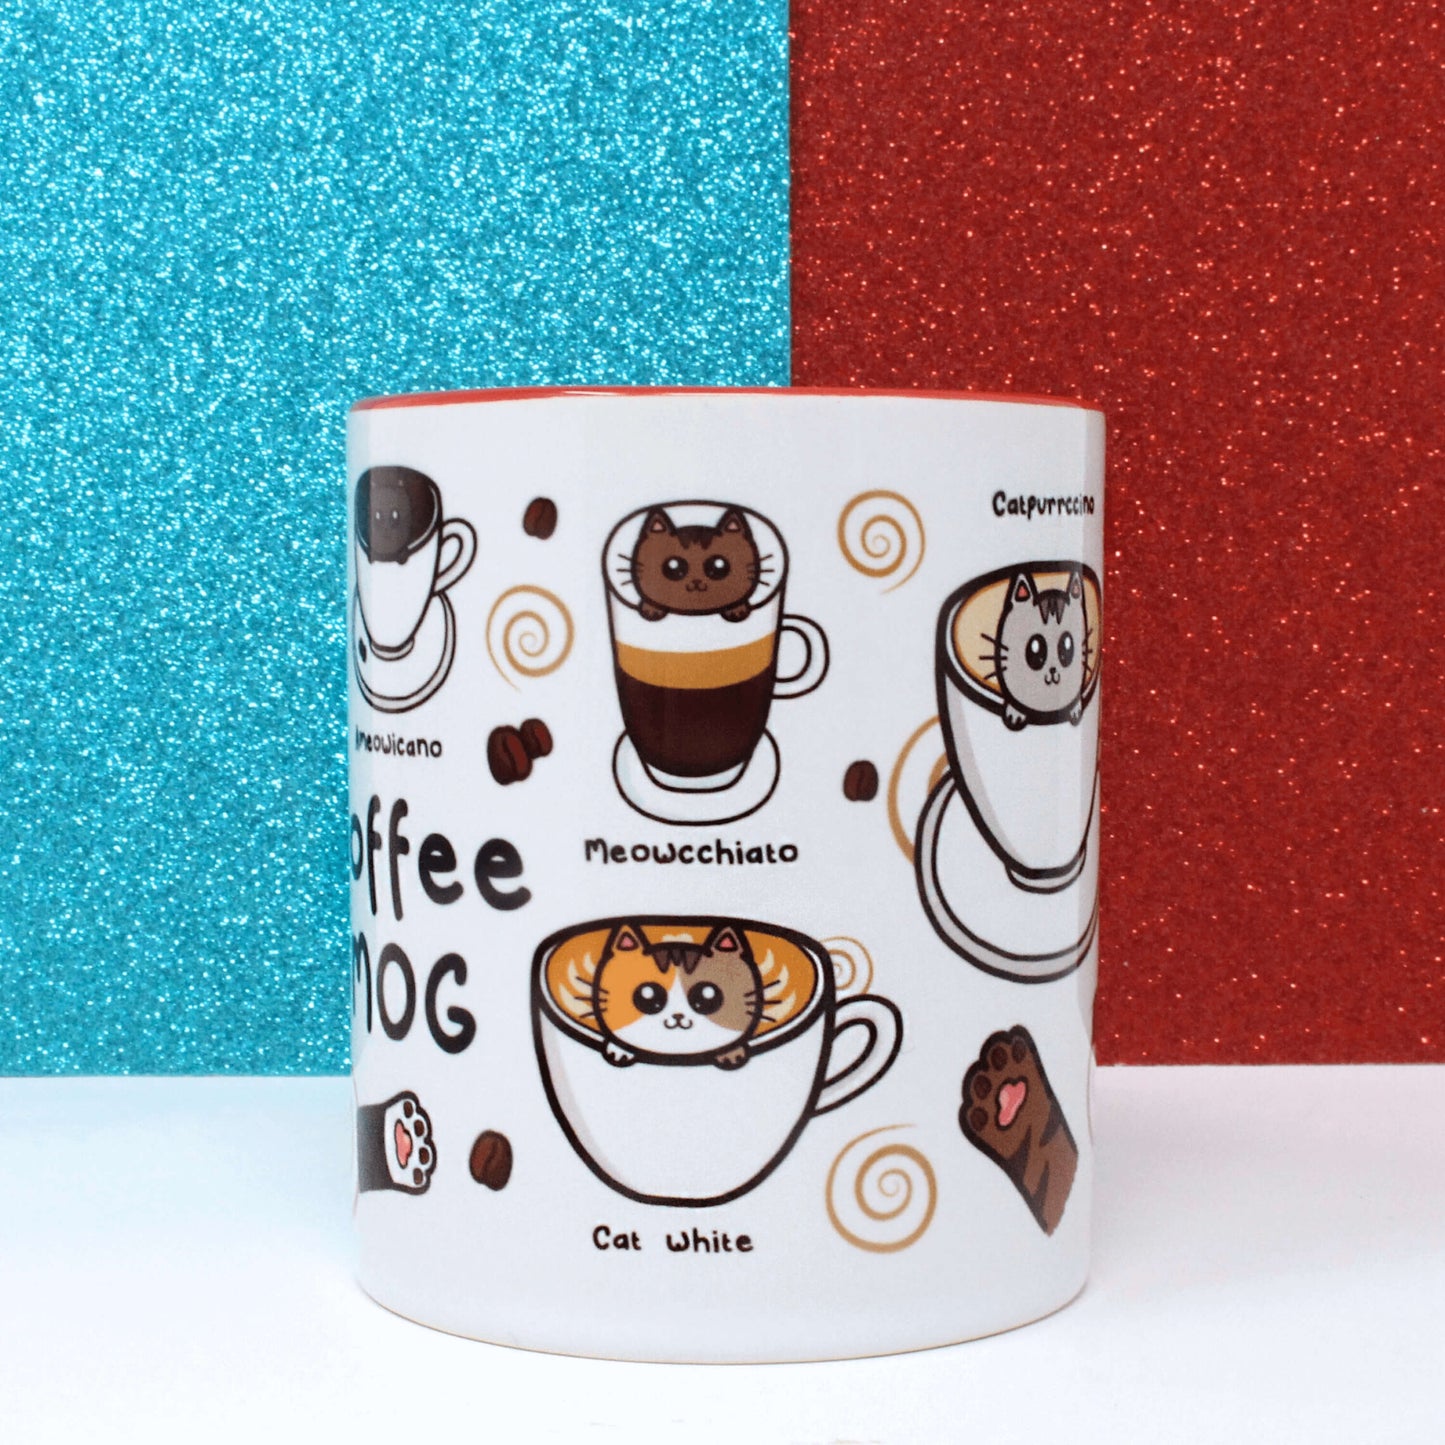 The Coffee Mog Cat Mug on a white table with a red and blue glitter background. The cat themed white coffee mug with red inner and handle is facing forward to show illustrations of cat paw toe coffee beans, meowcchiato (a brown cat in a mochiatto), cat white (a tortoiseshell cat in a flat white), catpurrccino (a grey cat in a cappuccino) with coffee beans and brown swirls.